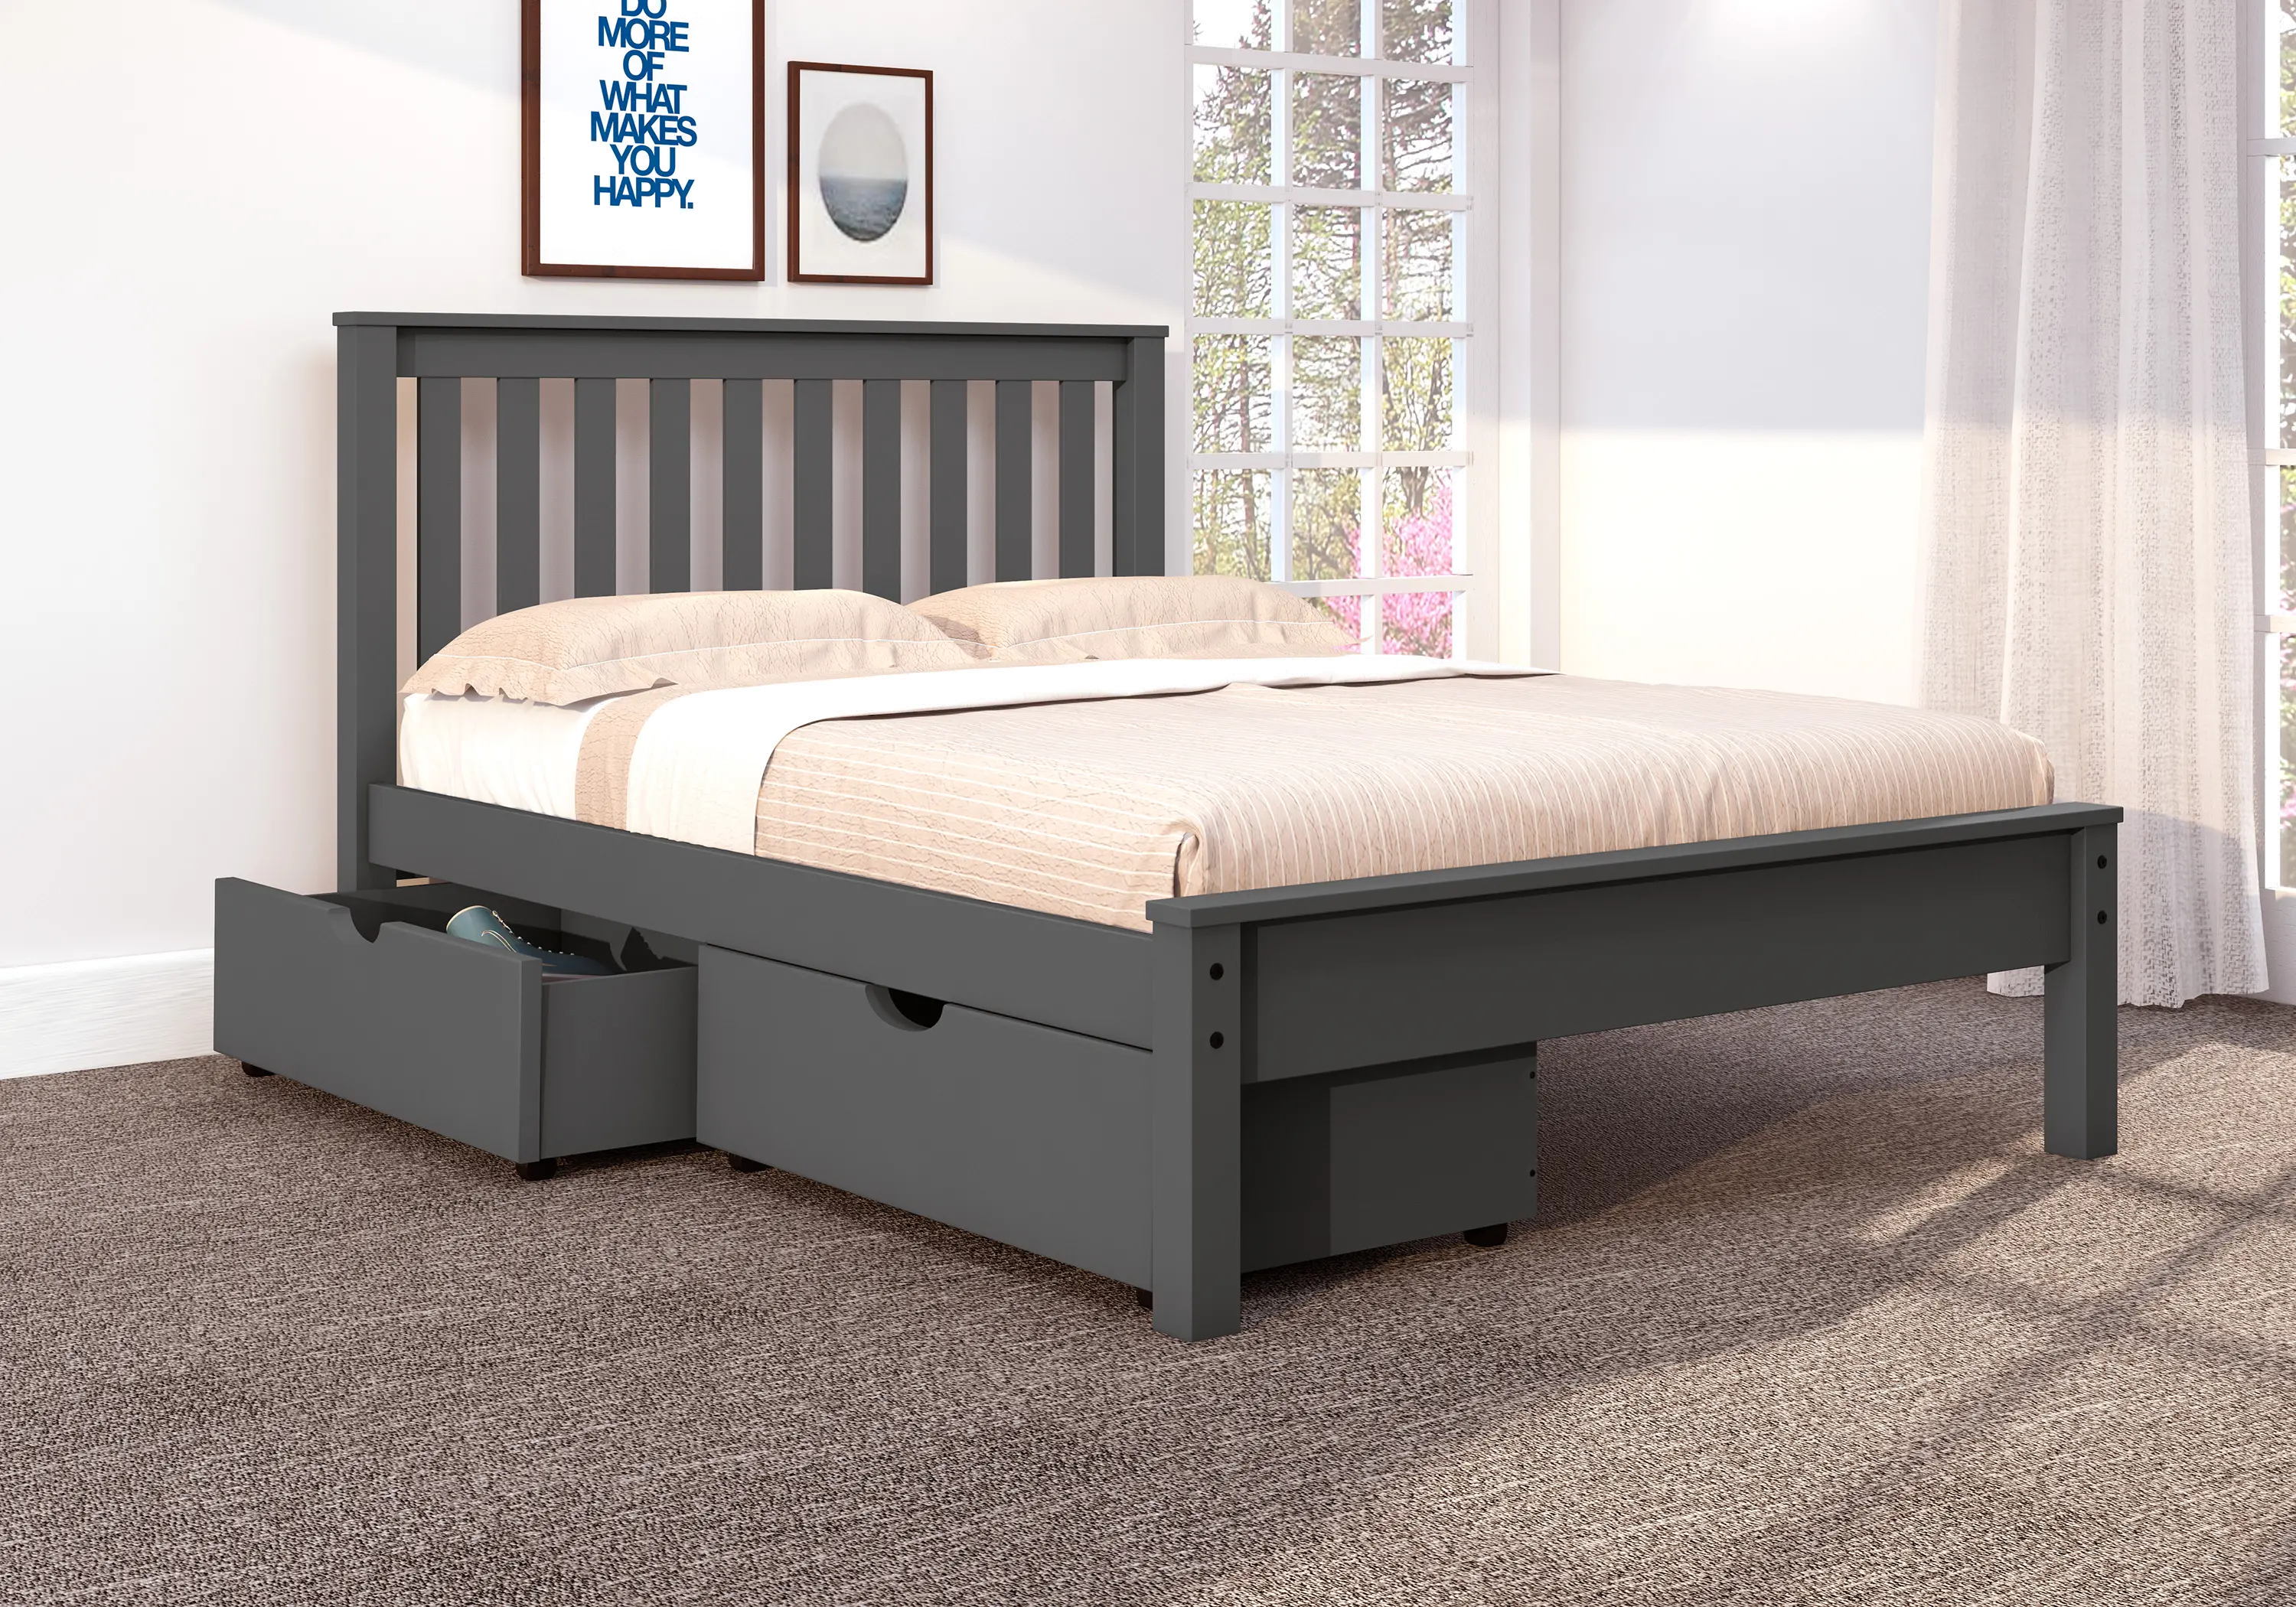 Carson Dark Gray Full Bed with Dual Underbed Drawers